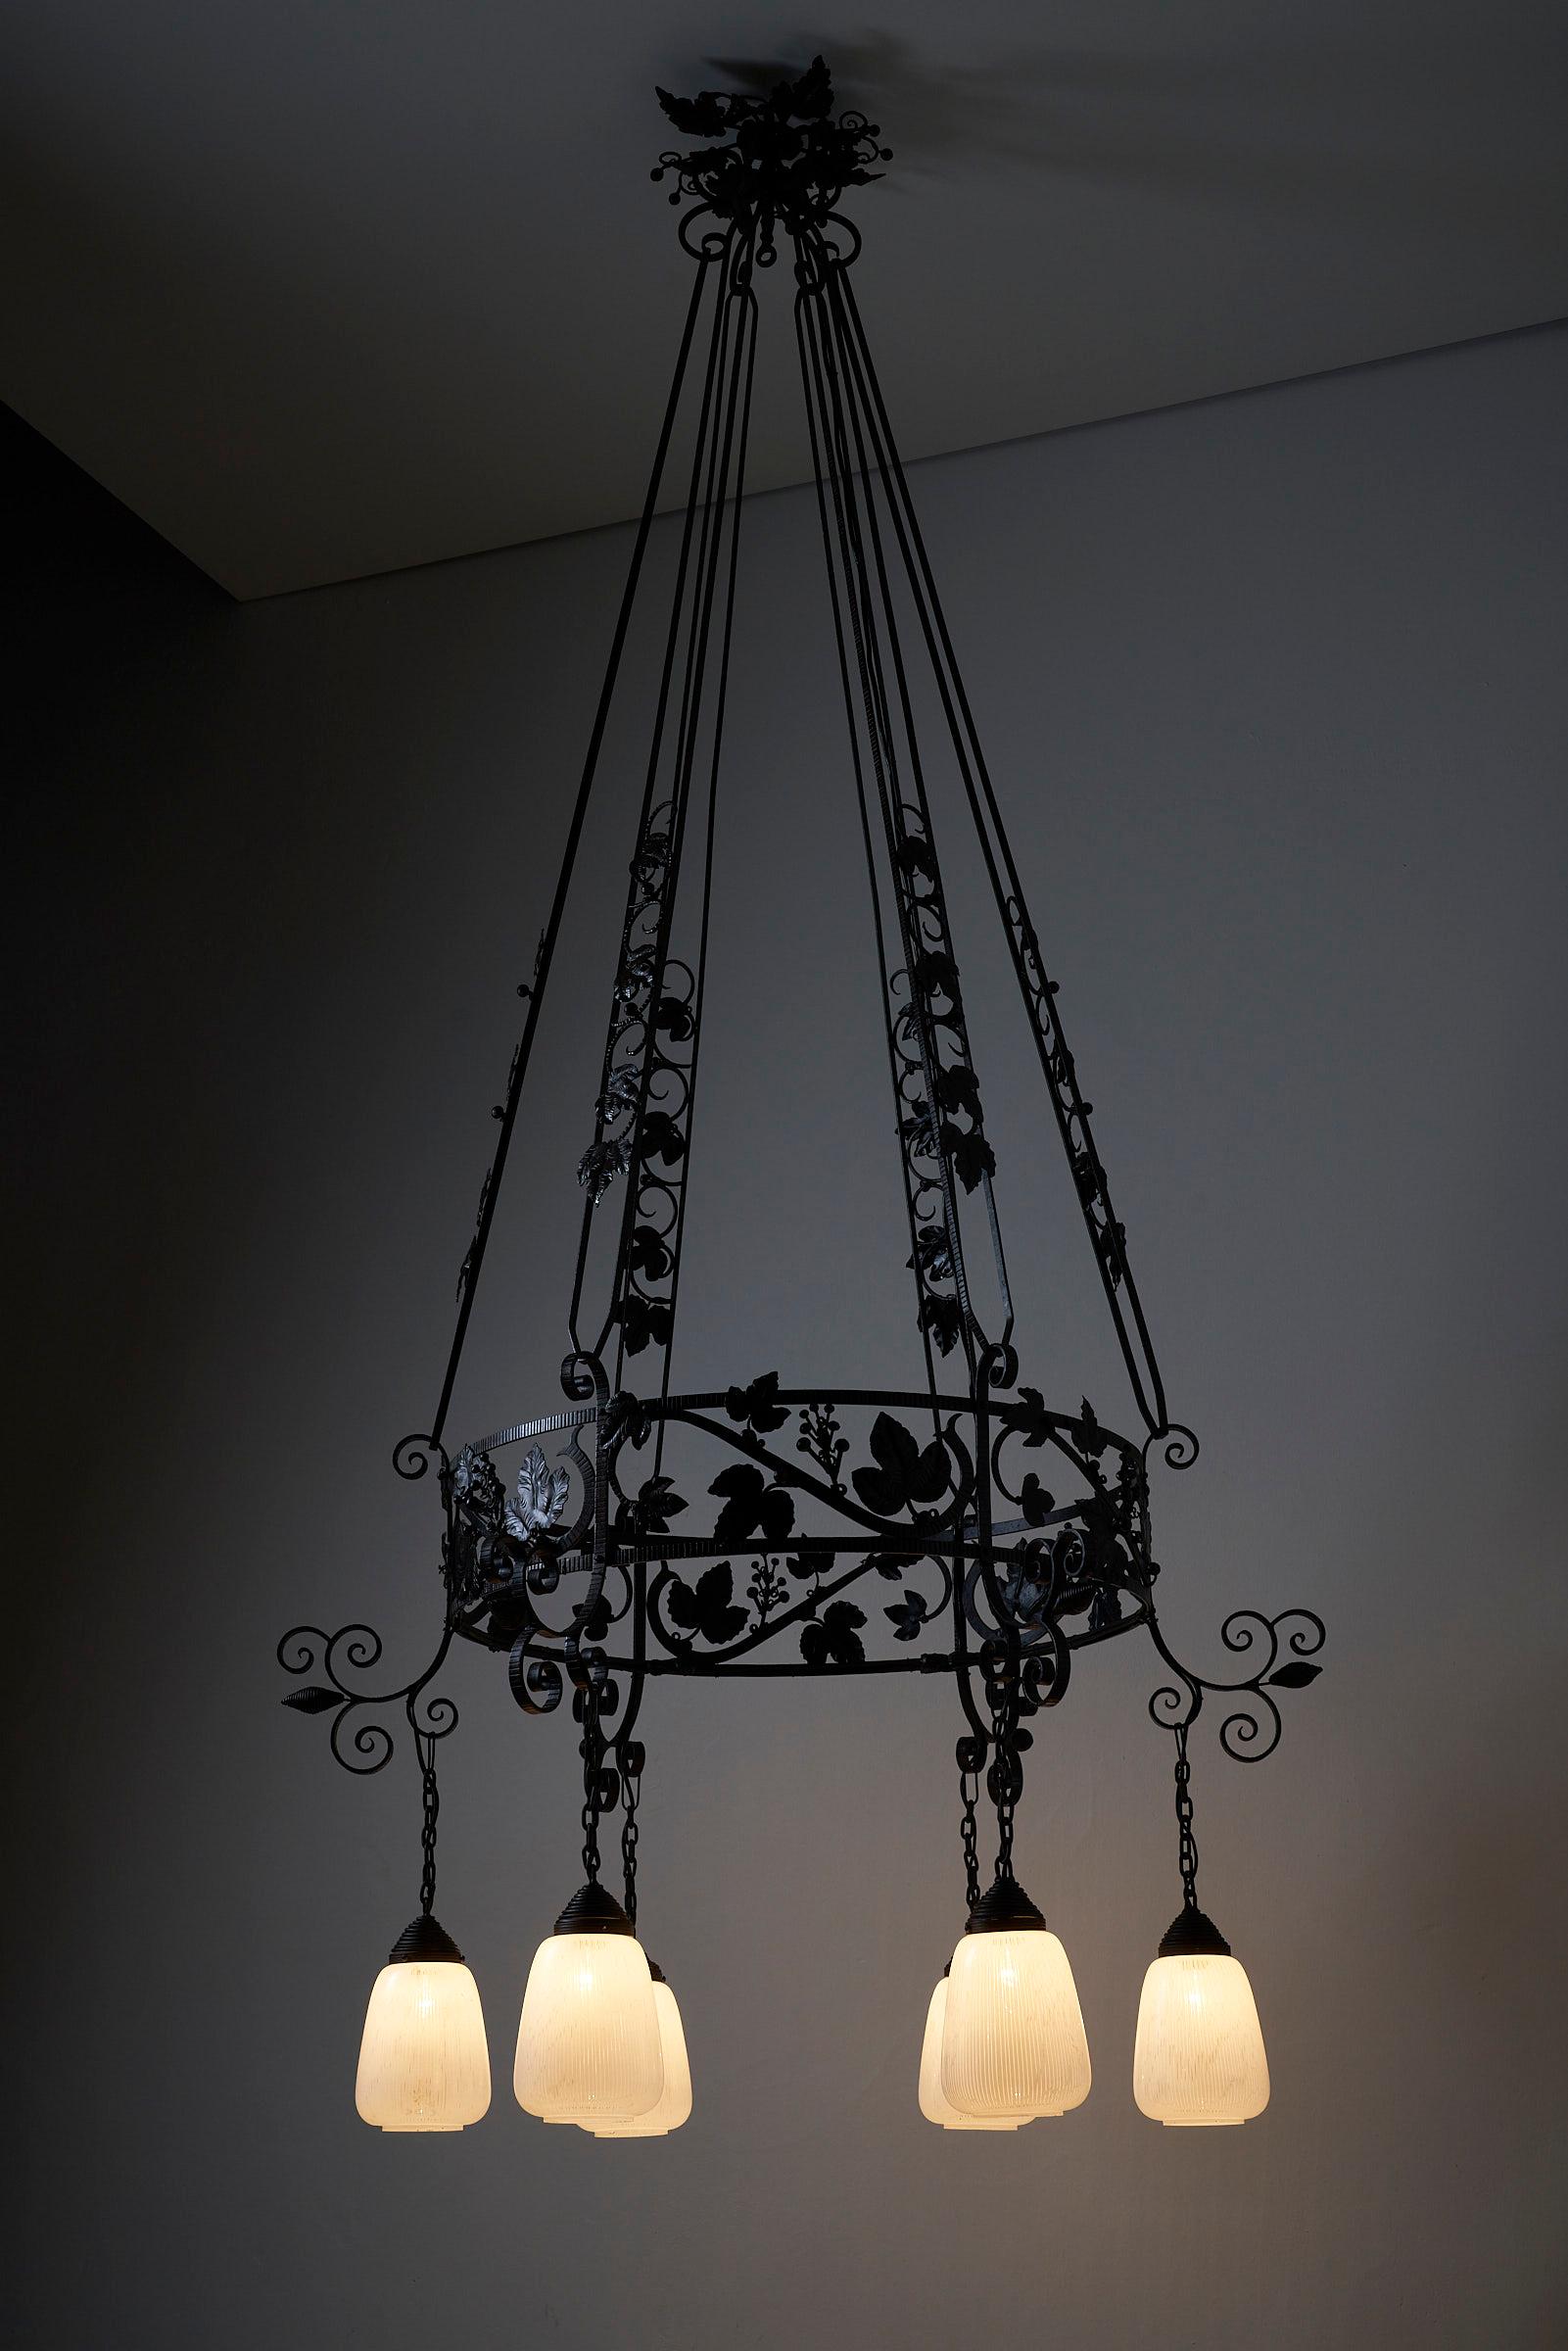 Introducing a stunning Wrought Iron Chandelier adorned with delicate Wine Leaves, a grandeur piece that comes around only once in a while. Ideal for evoking a sense of high end antique opulence in older castle-inspired settings or within high-end